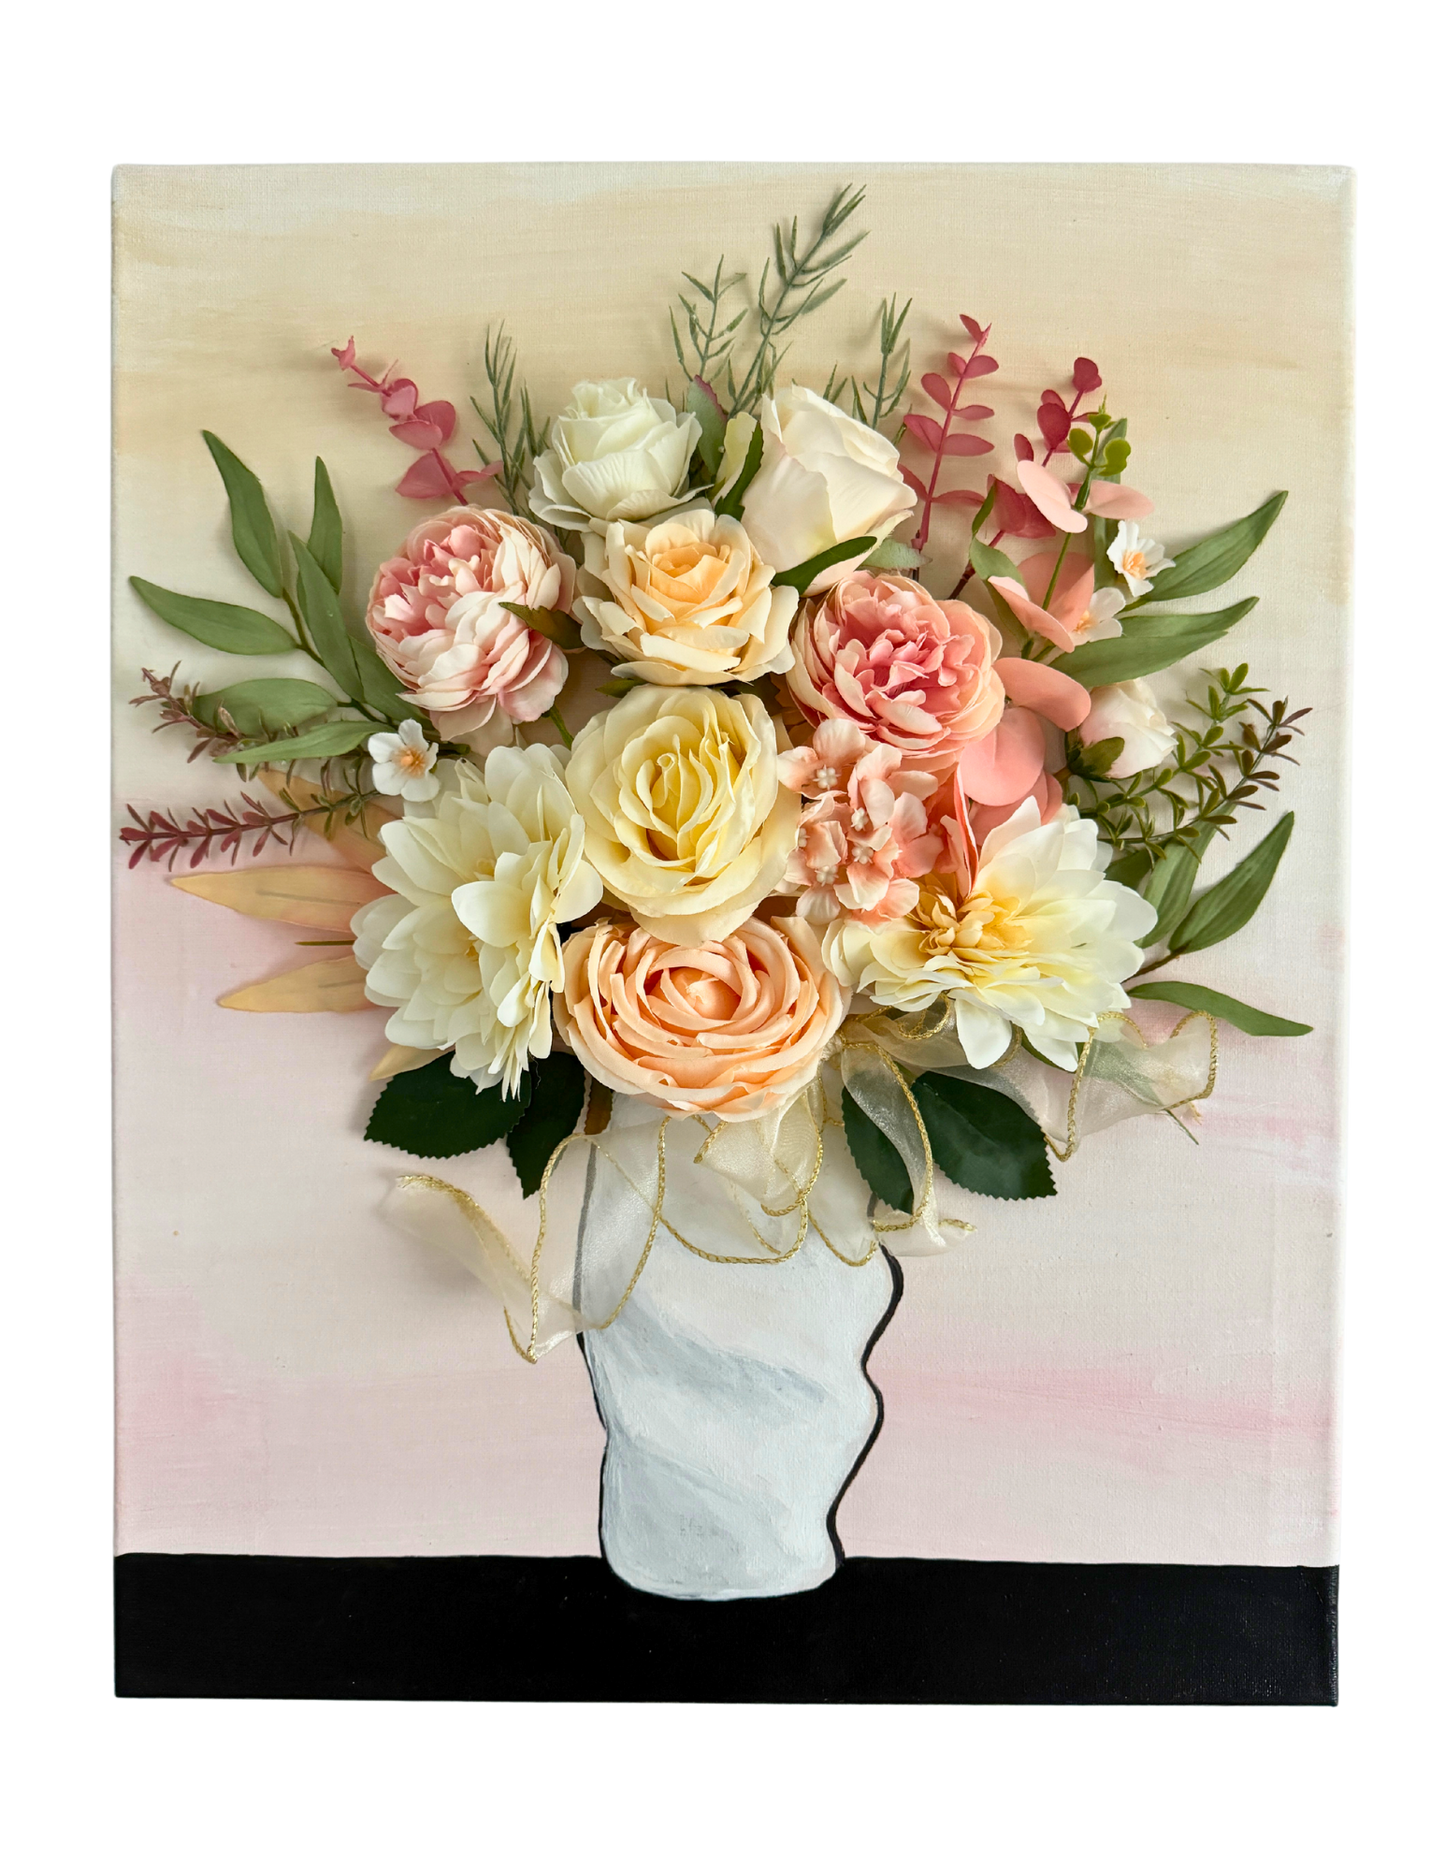 Blissful Blooms Bouquet Art on Canvas 16 x 20 3D Artwork for Your Home or Office